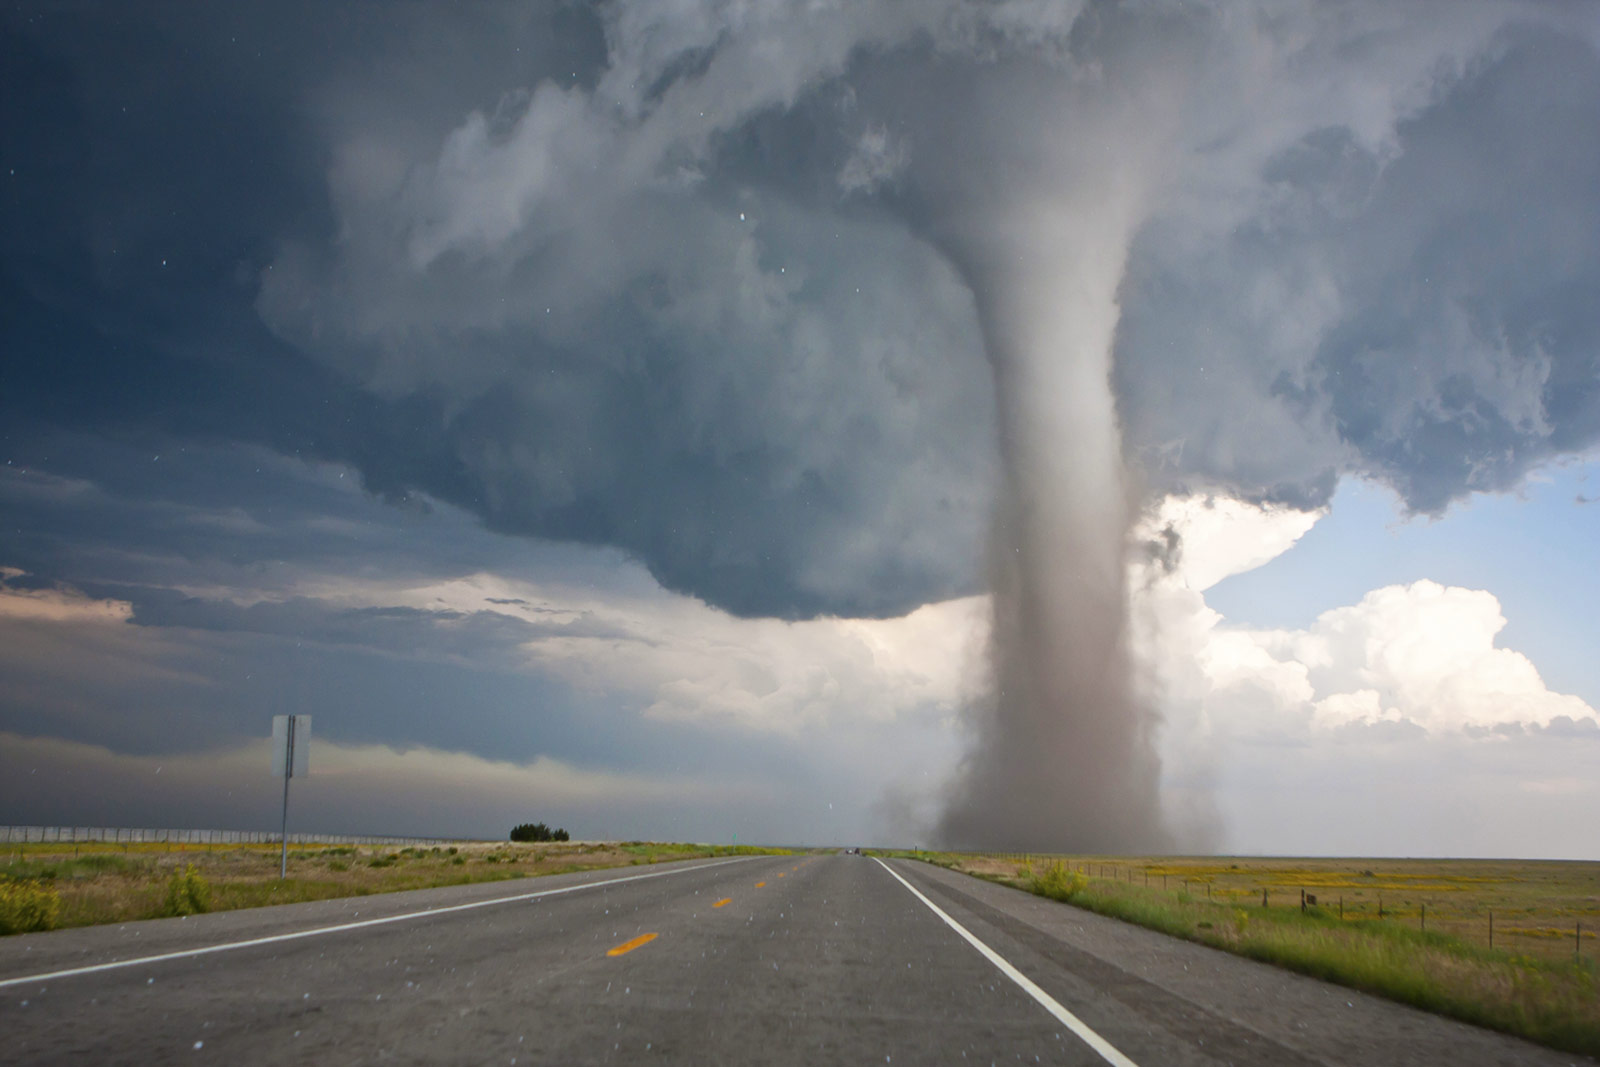 Is Your General Knowledge Better Than the Average Person? Tornado